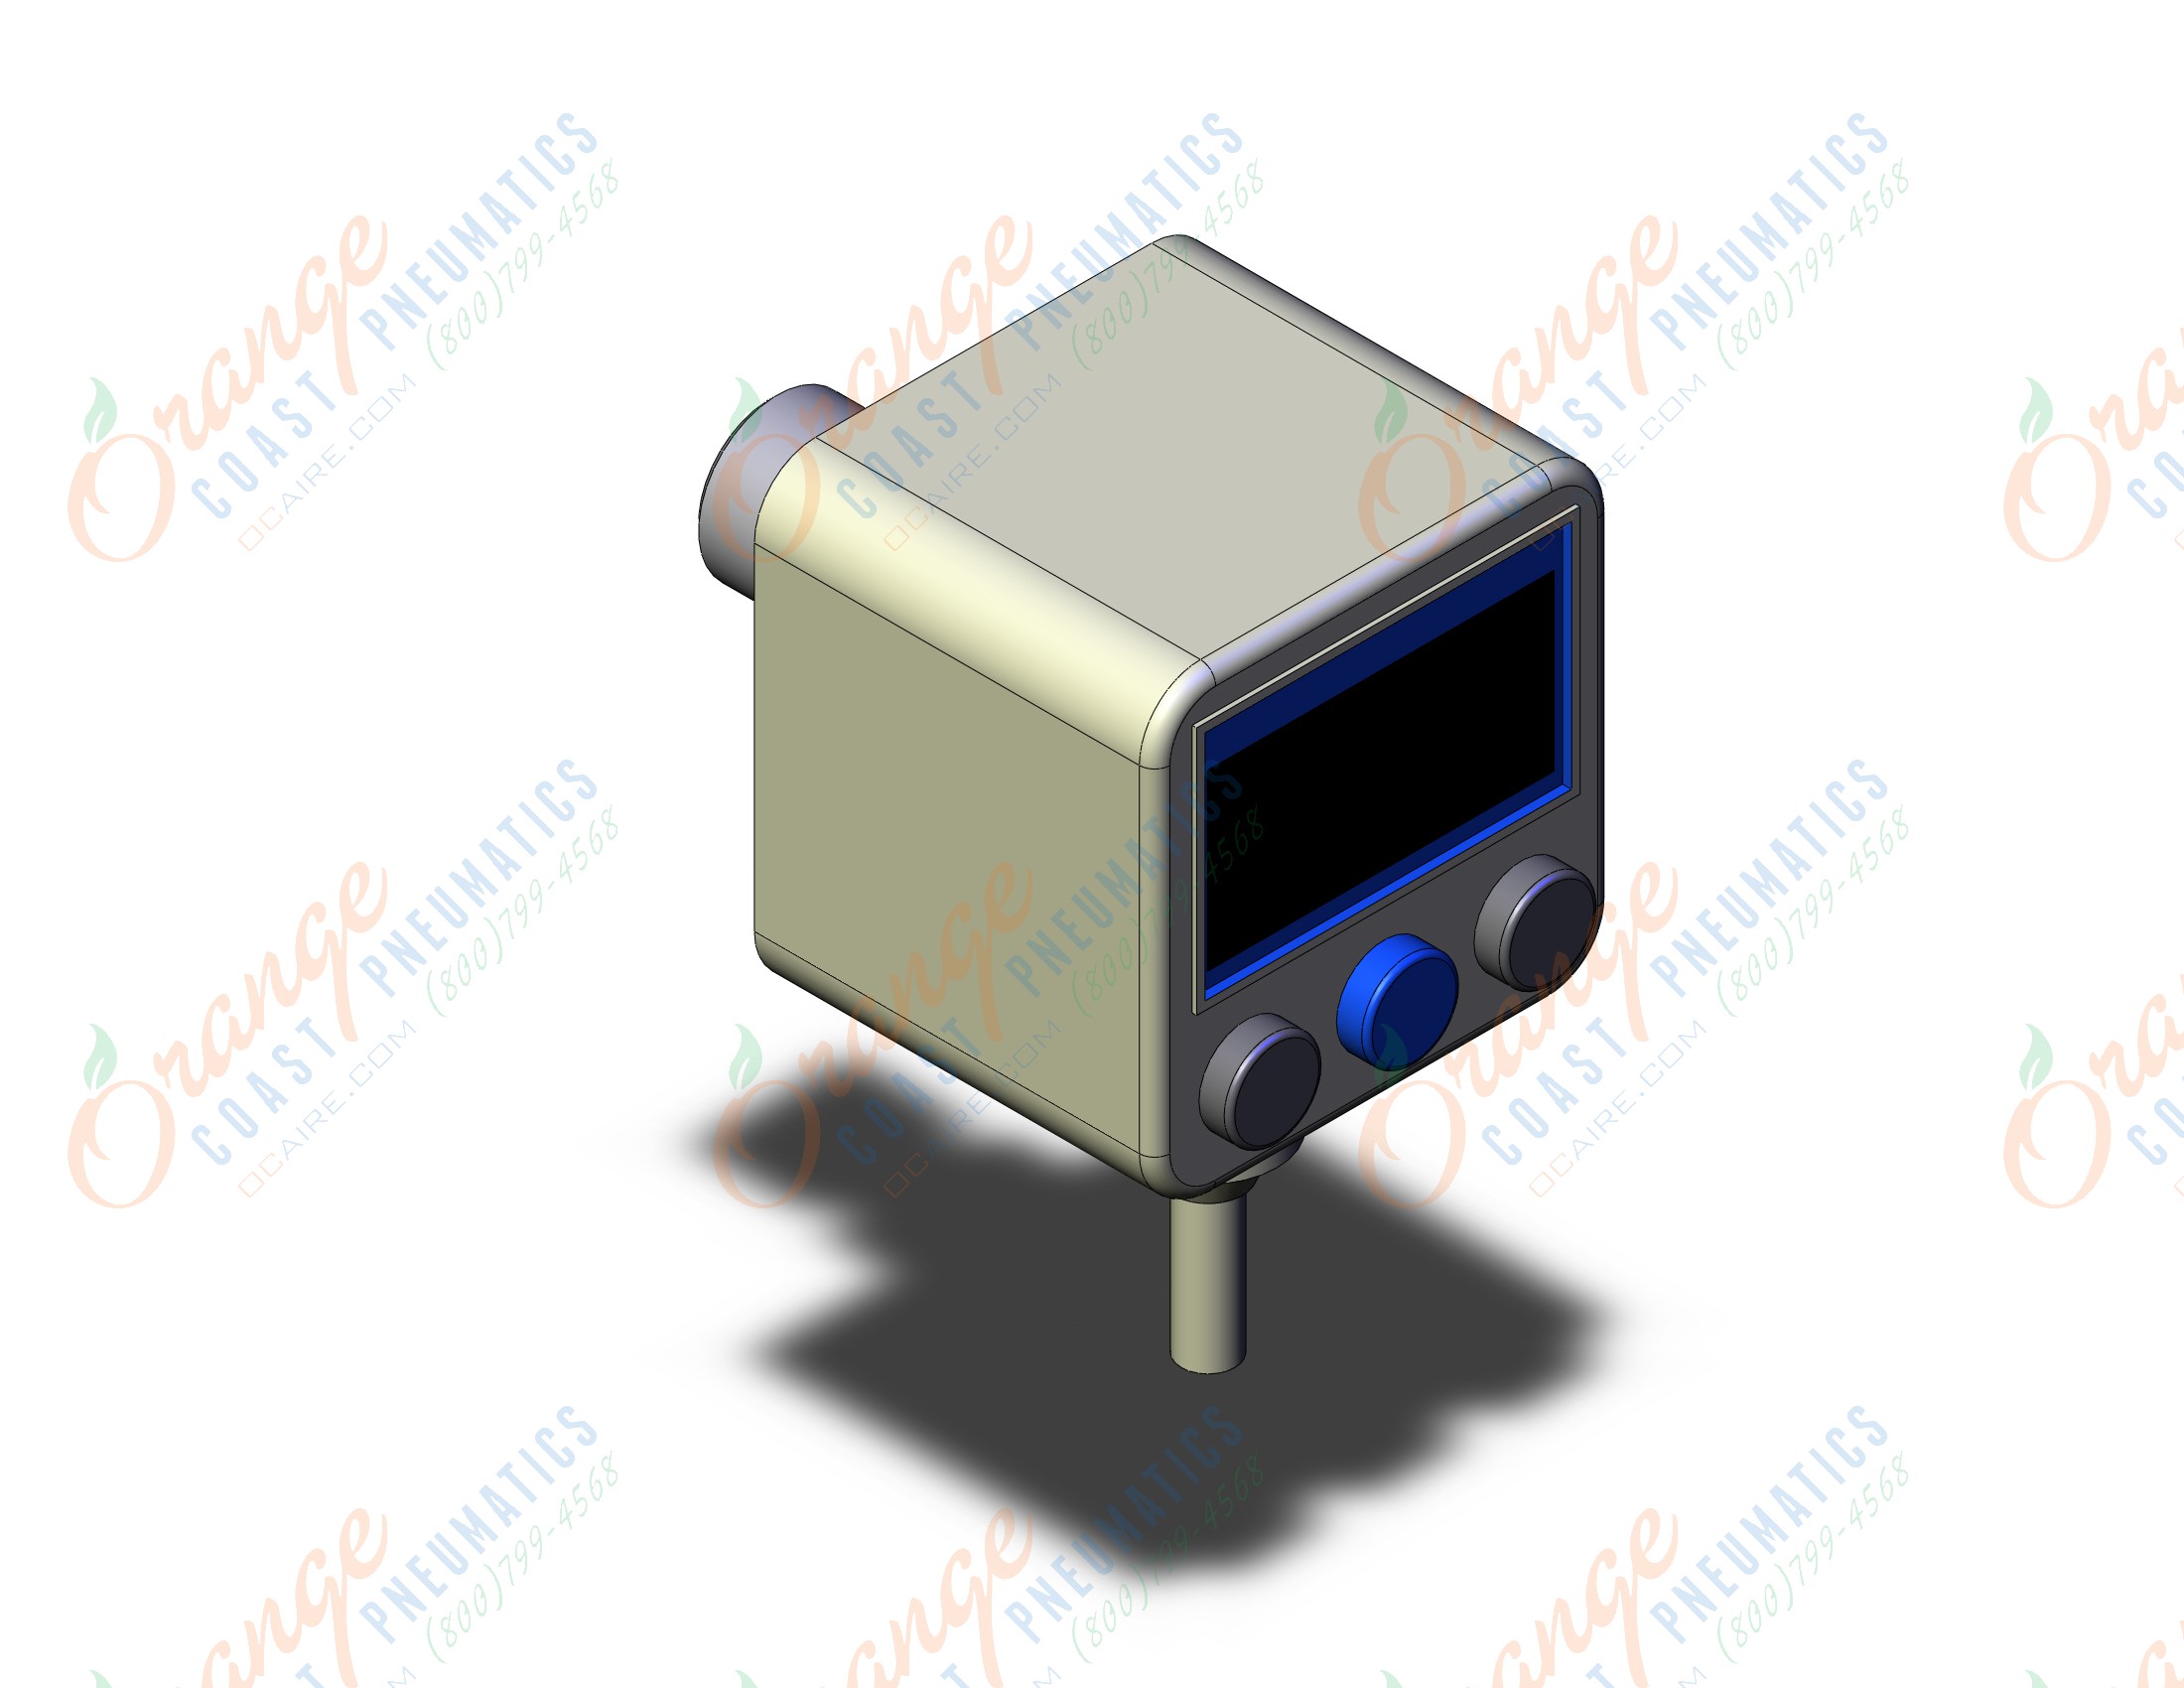 SMC ISE40A-N01-Y-PK ise40/50/60 1/8" npt version, ISE40/50/60 PRESSURE SWITCH